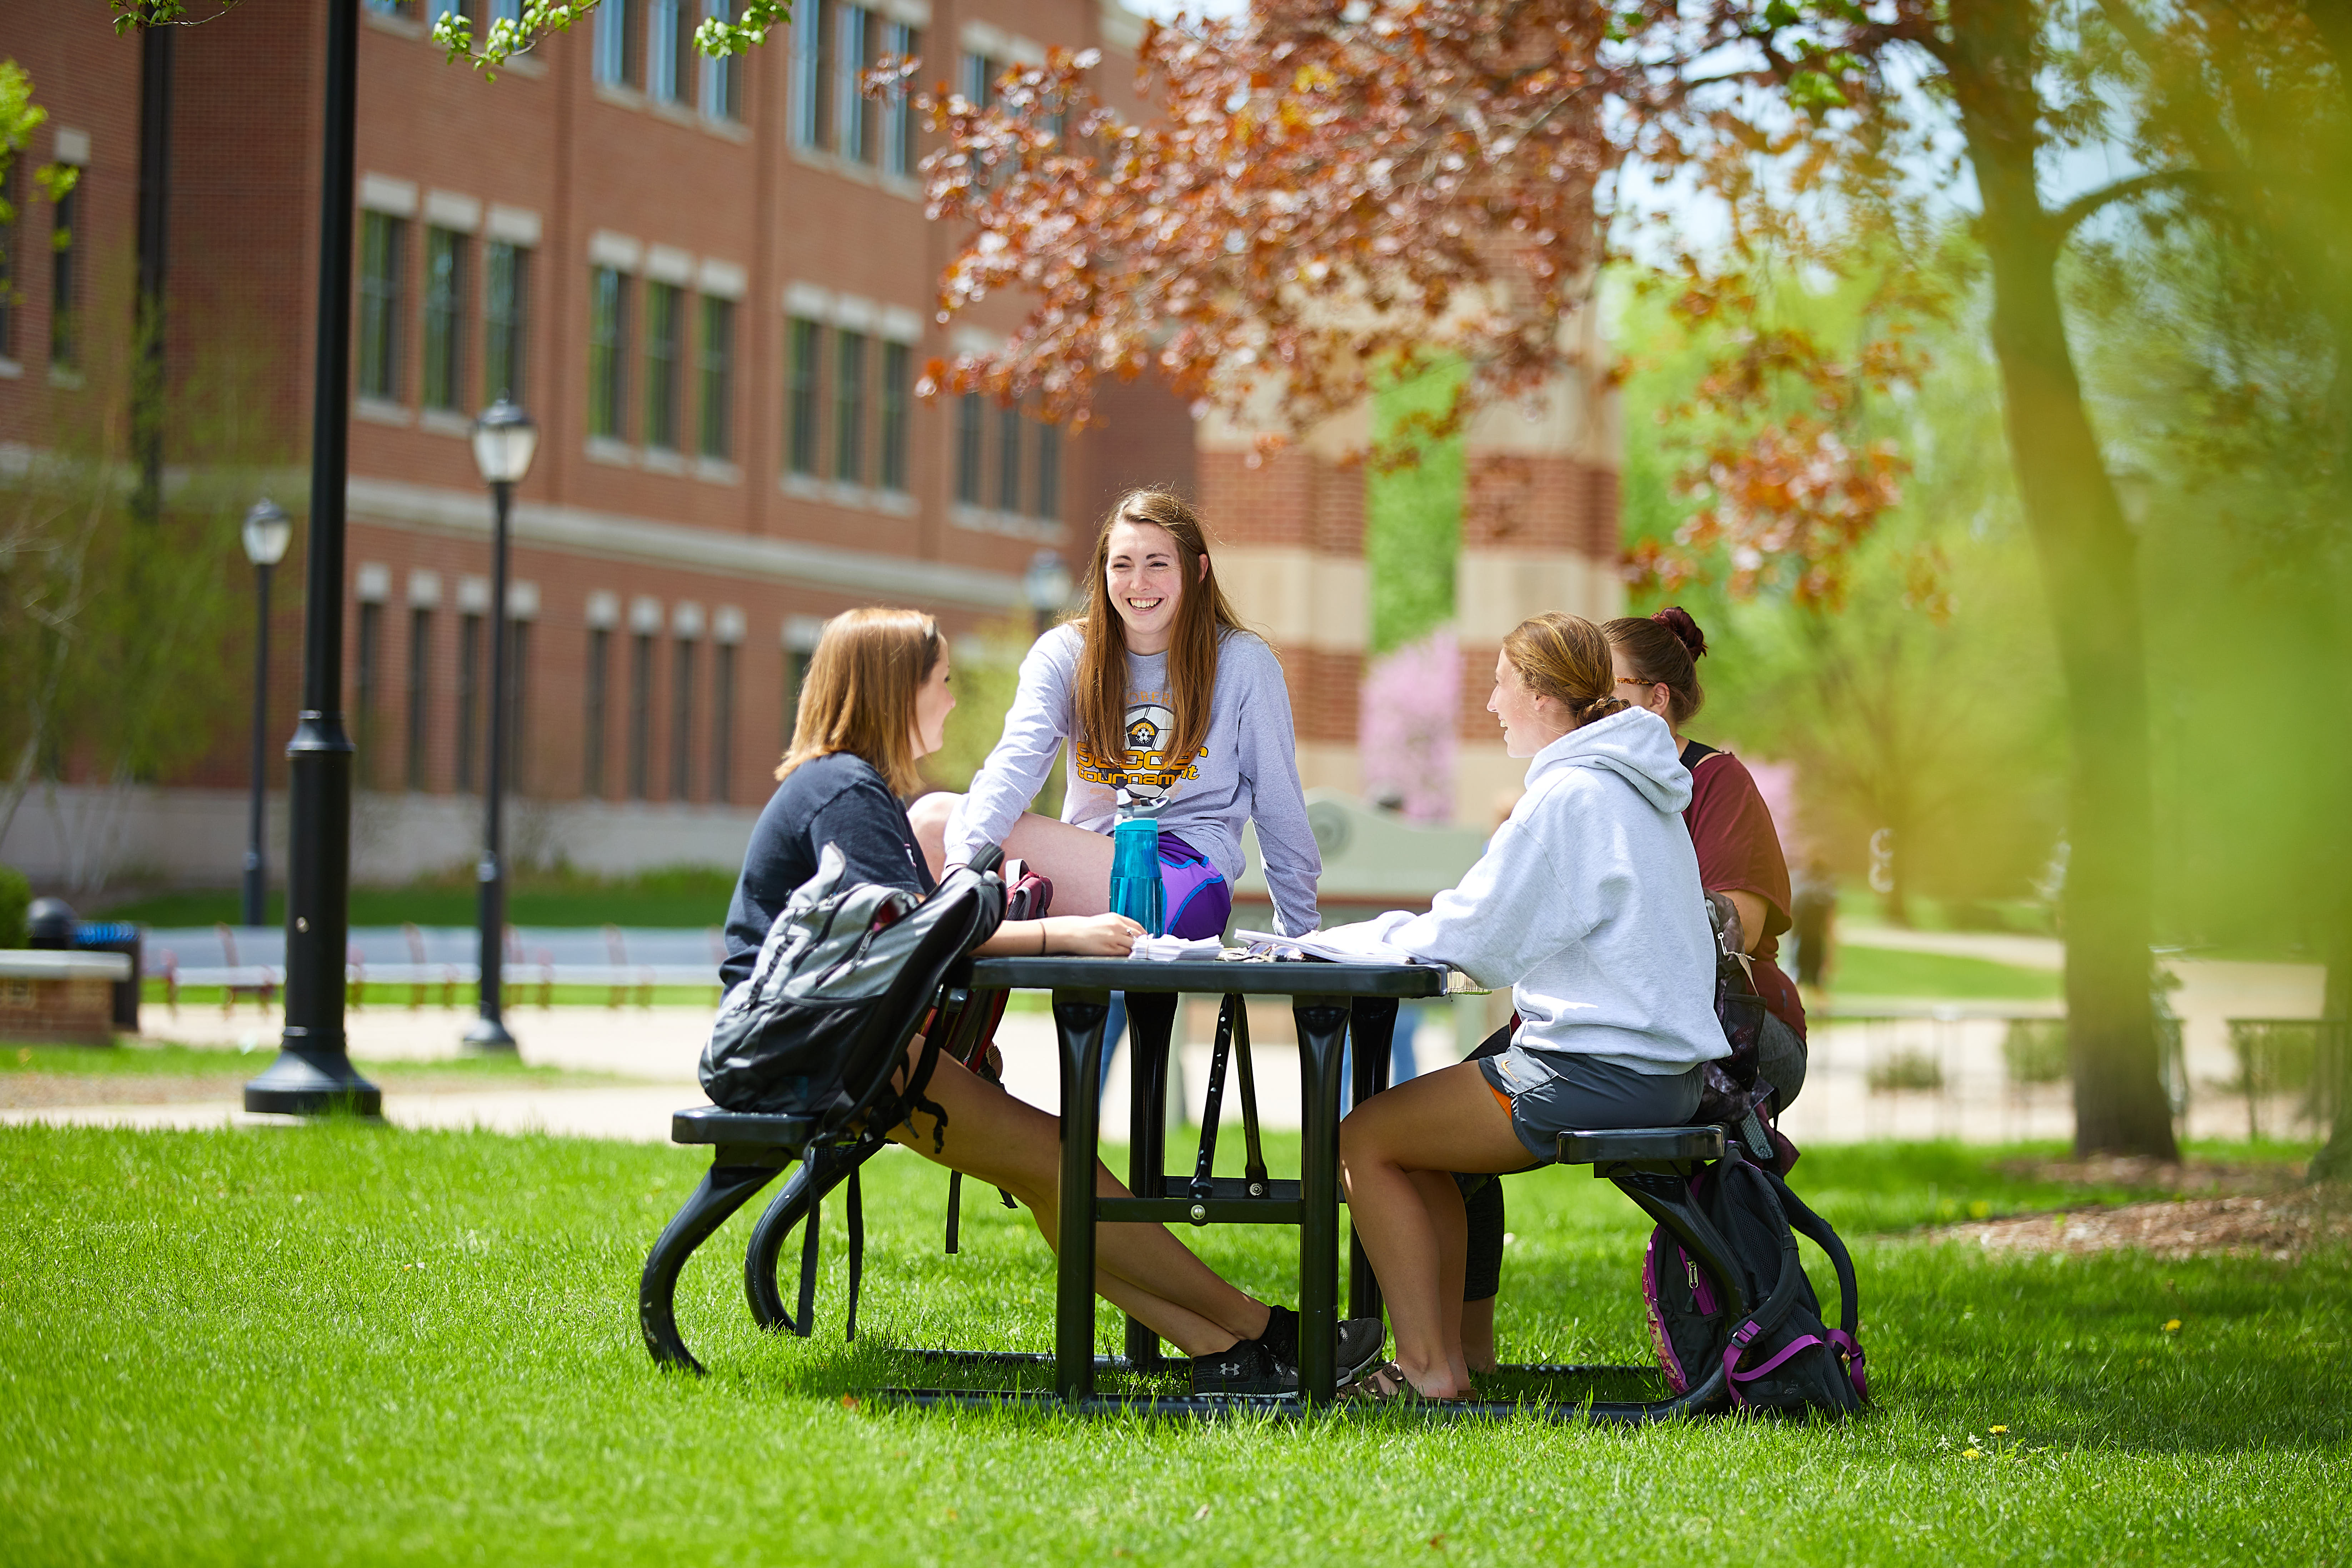 Students sit at a picnic table on the campus lawn.